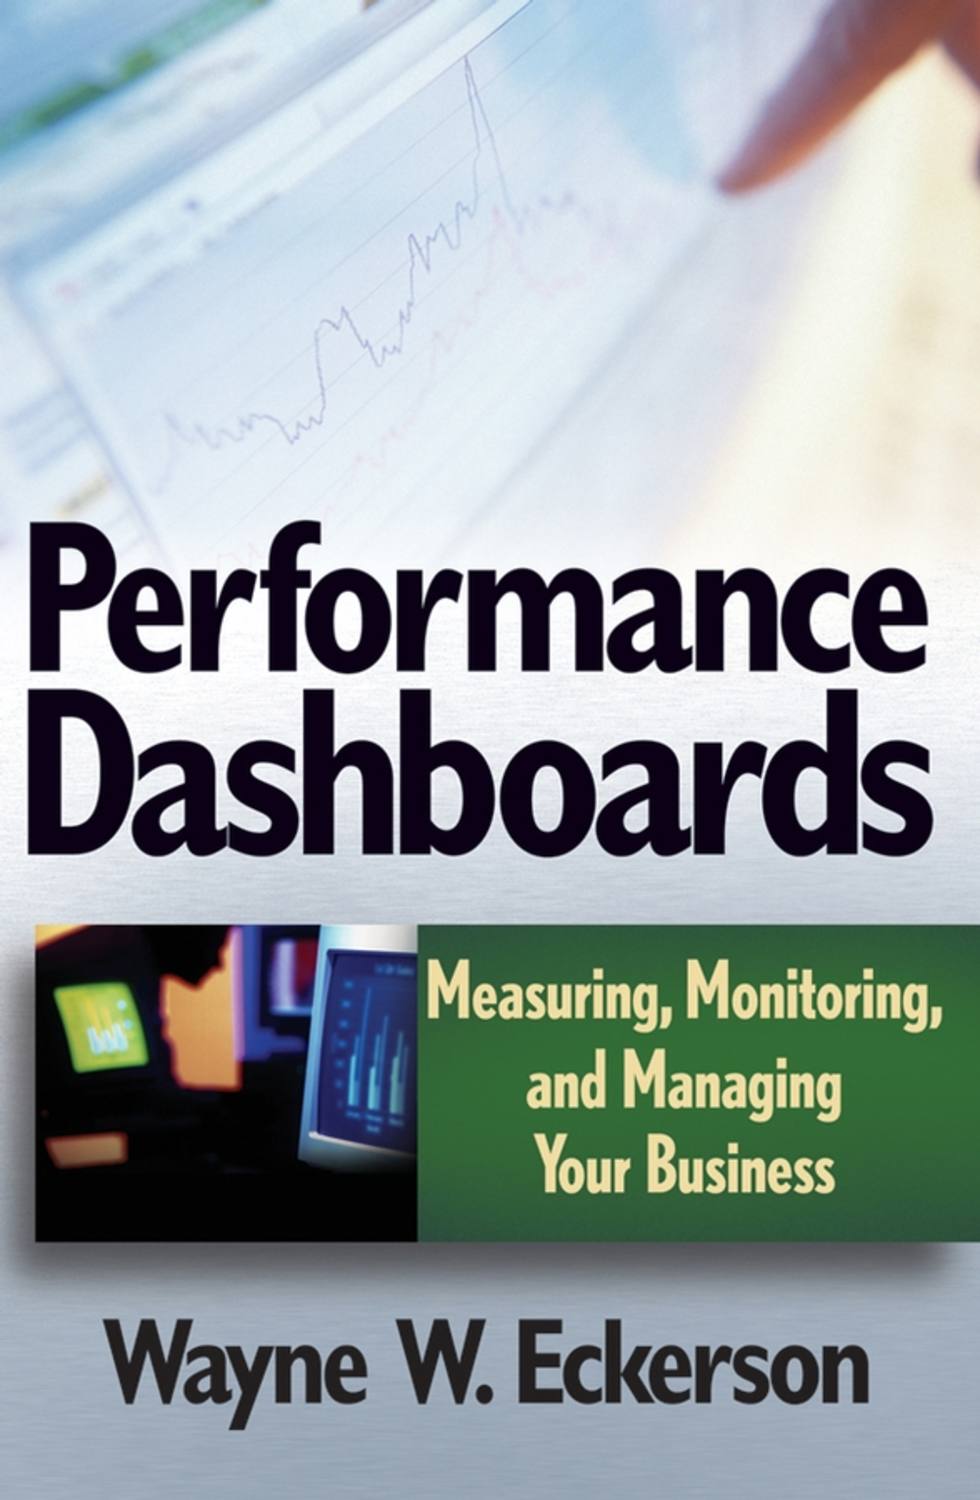 Book performance. Measurement and monitoring. Disciplined Manager.